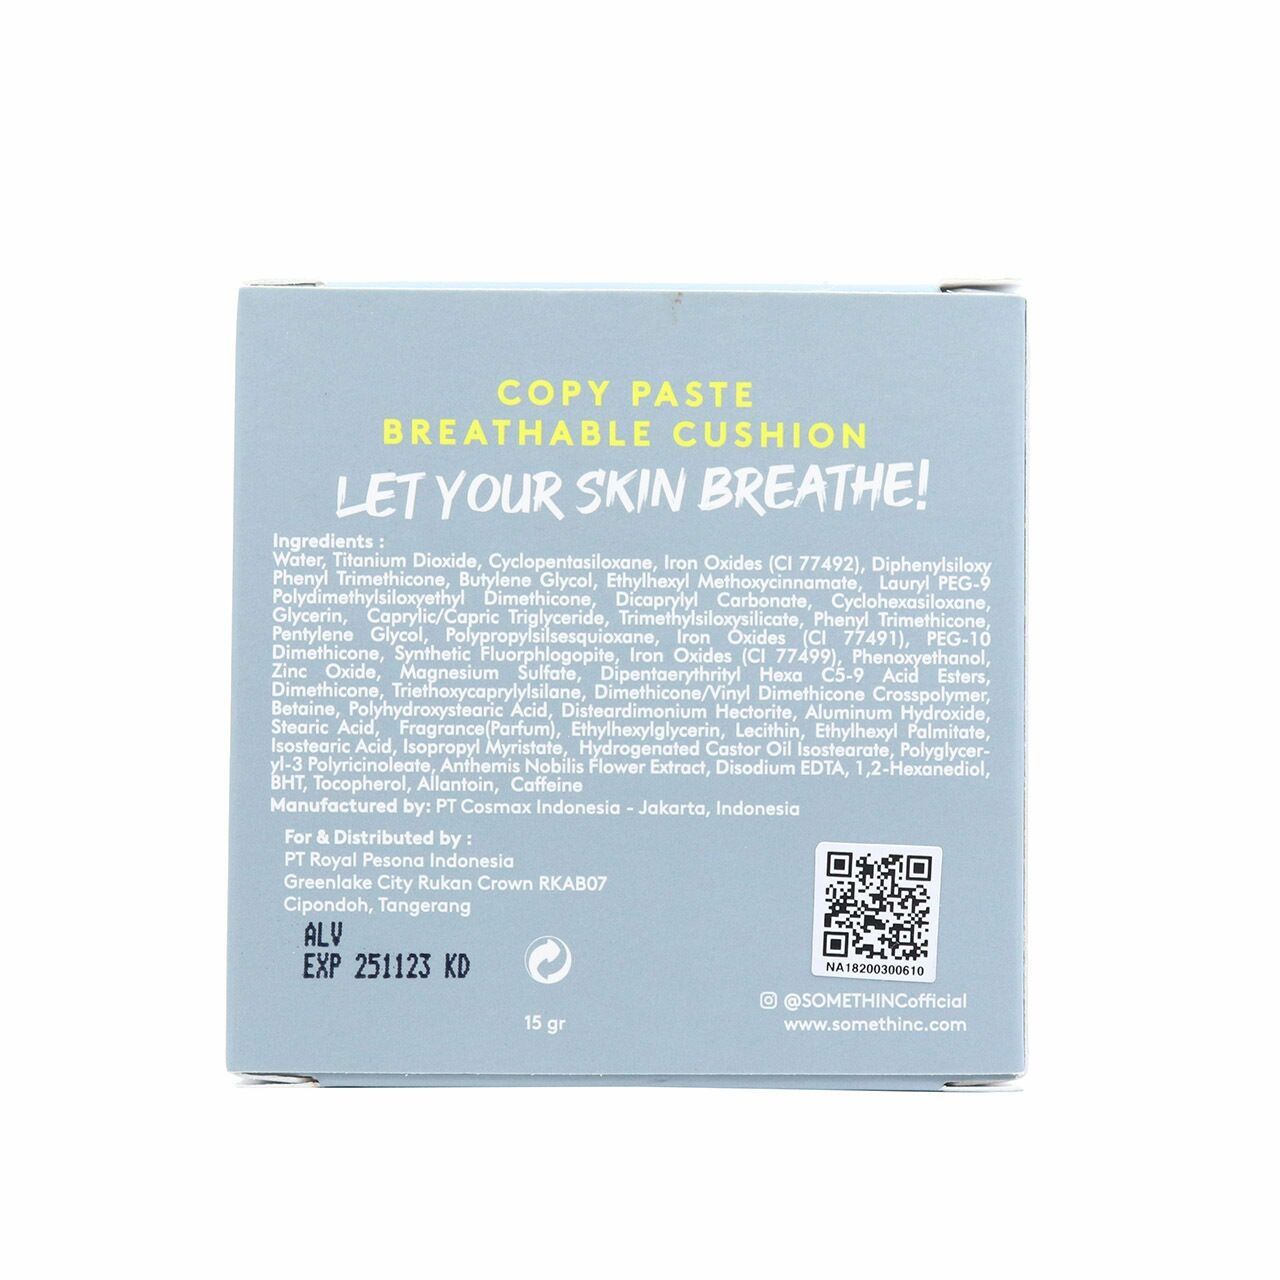 Somethinc Copy Paste Breathable Cushion SPF 33 PA++ - Alter Faces